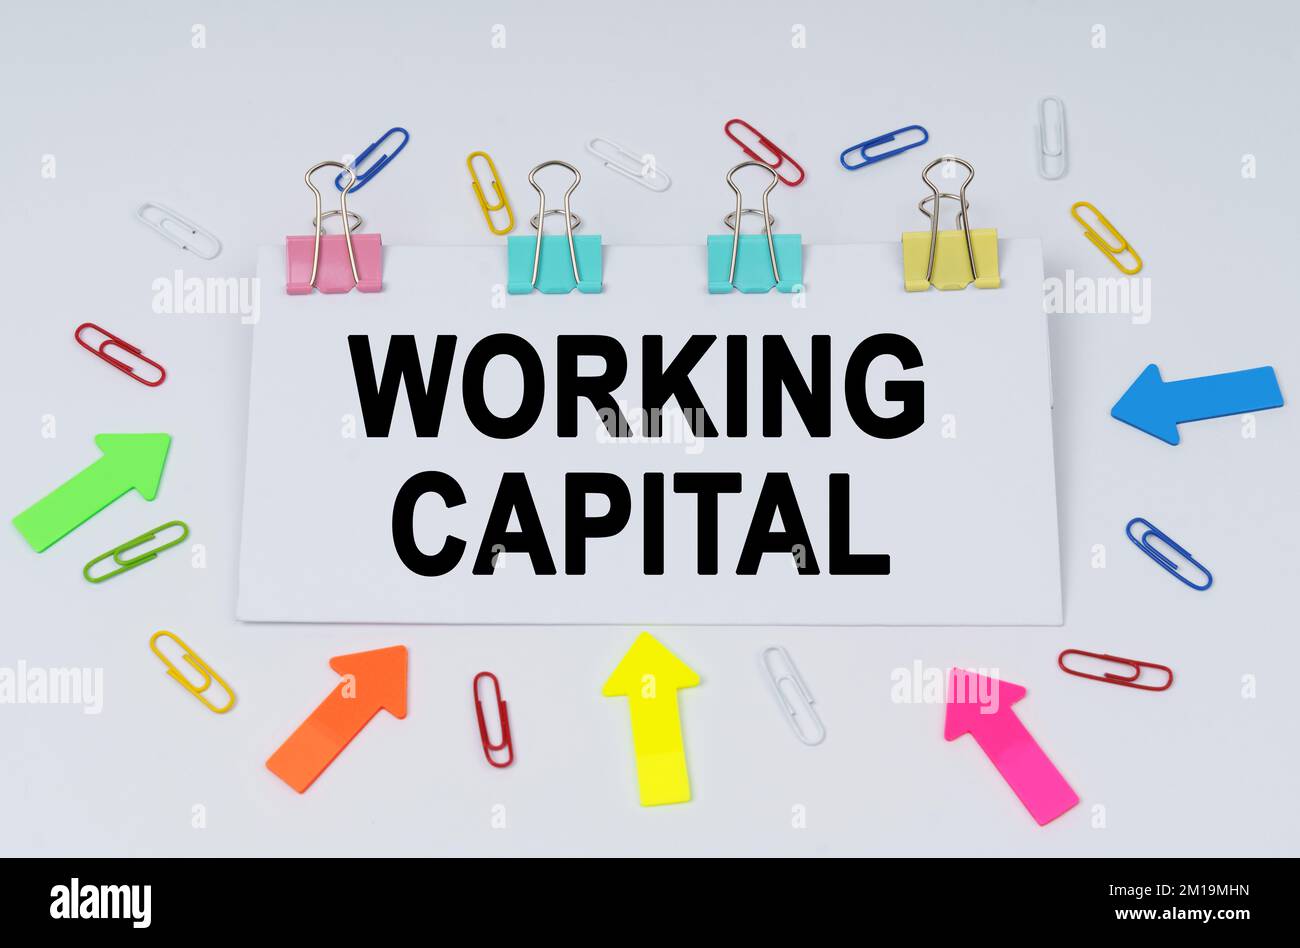 Business and finance concept. On the table there are paper clips and directional arrows, a sign that says - Working Capital Stock Photo